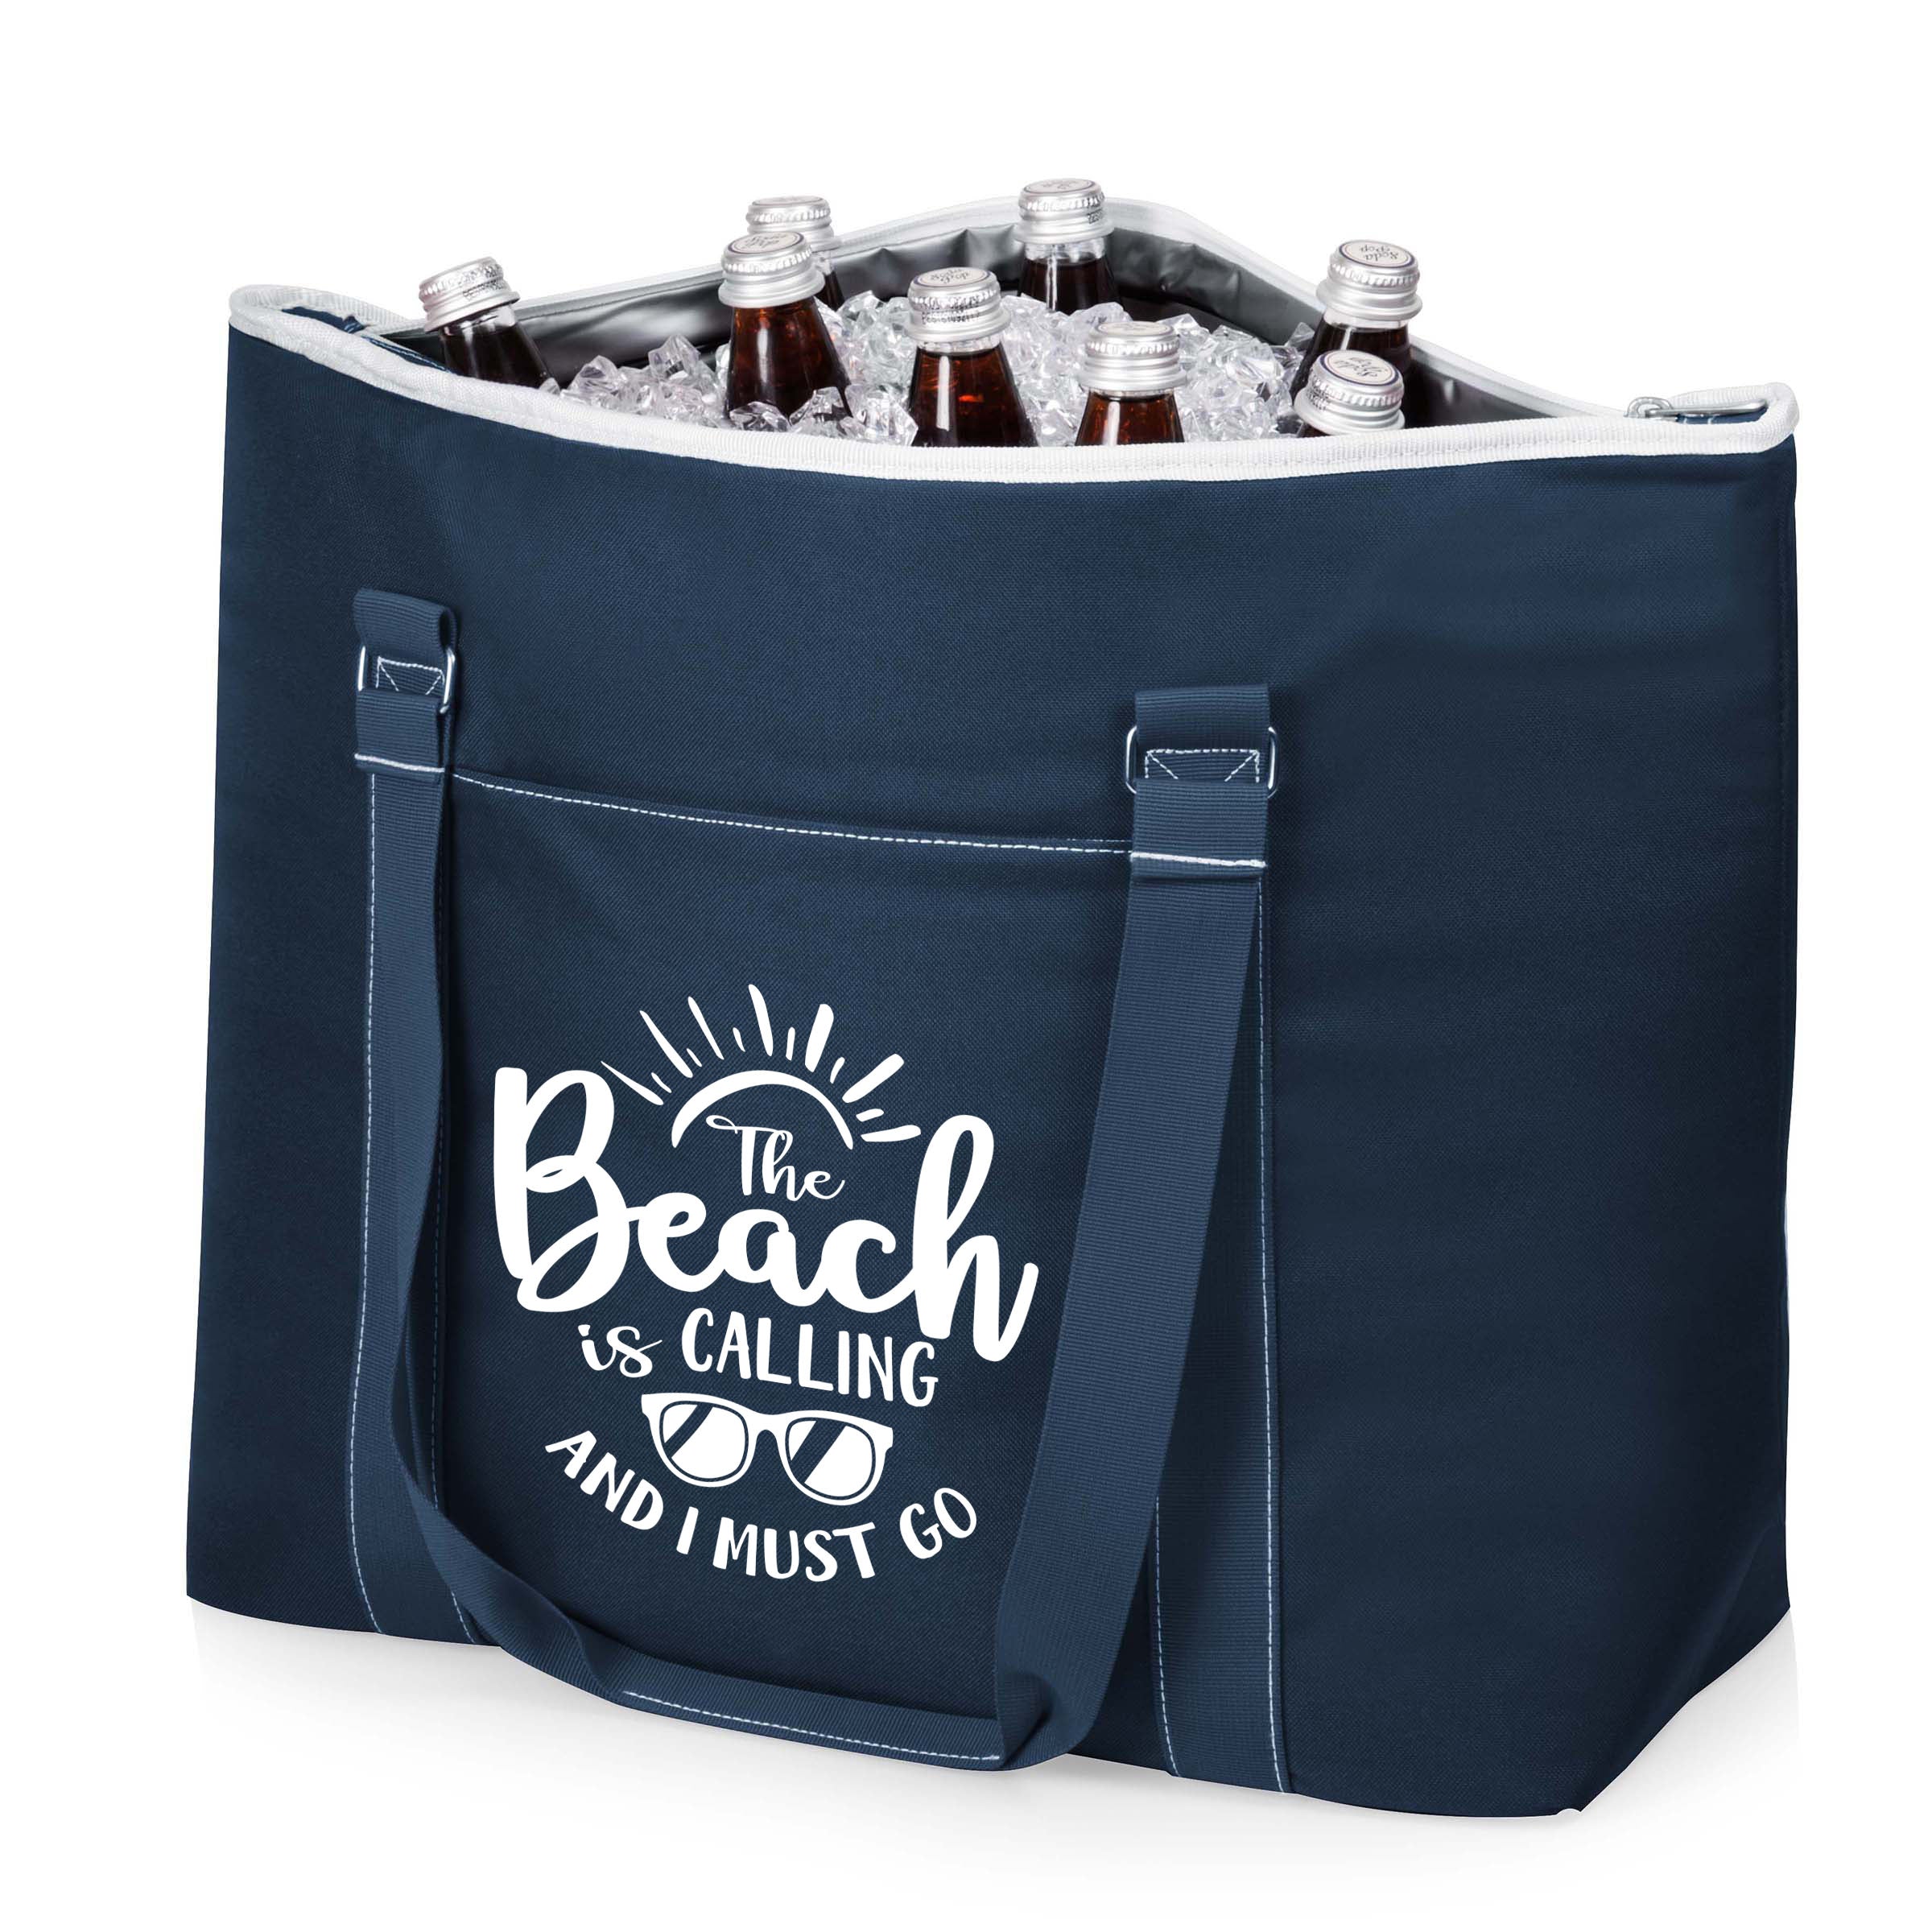 The Beach is Calling and I Must Go - Beach Sayings - Tahoe XL Cooler Tote Bag